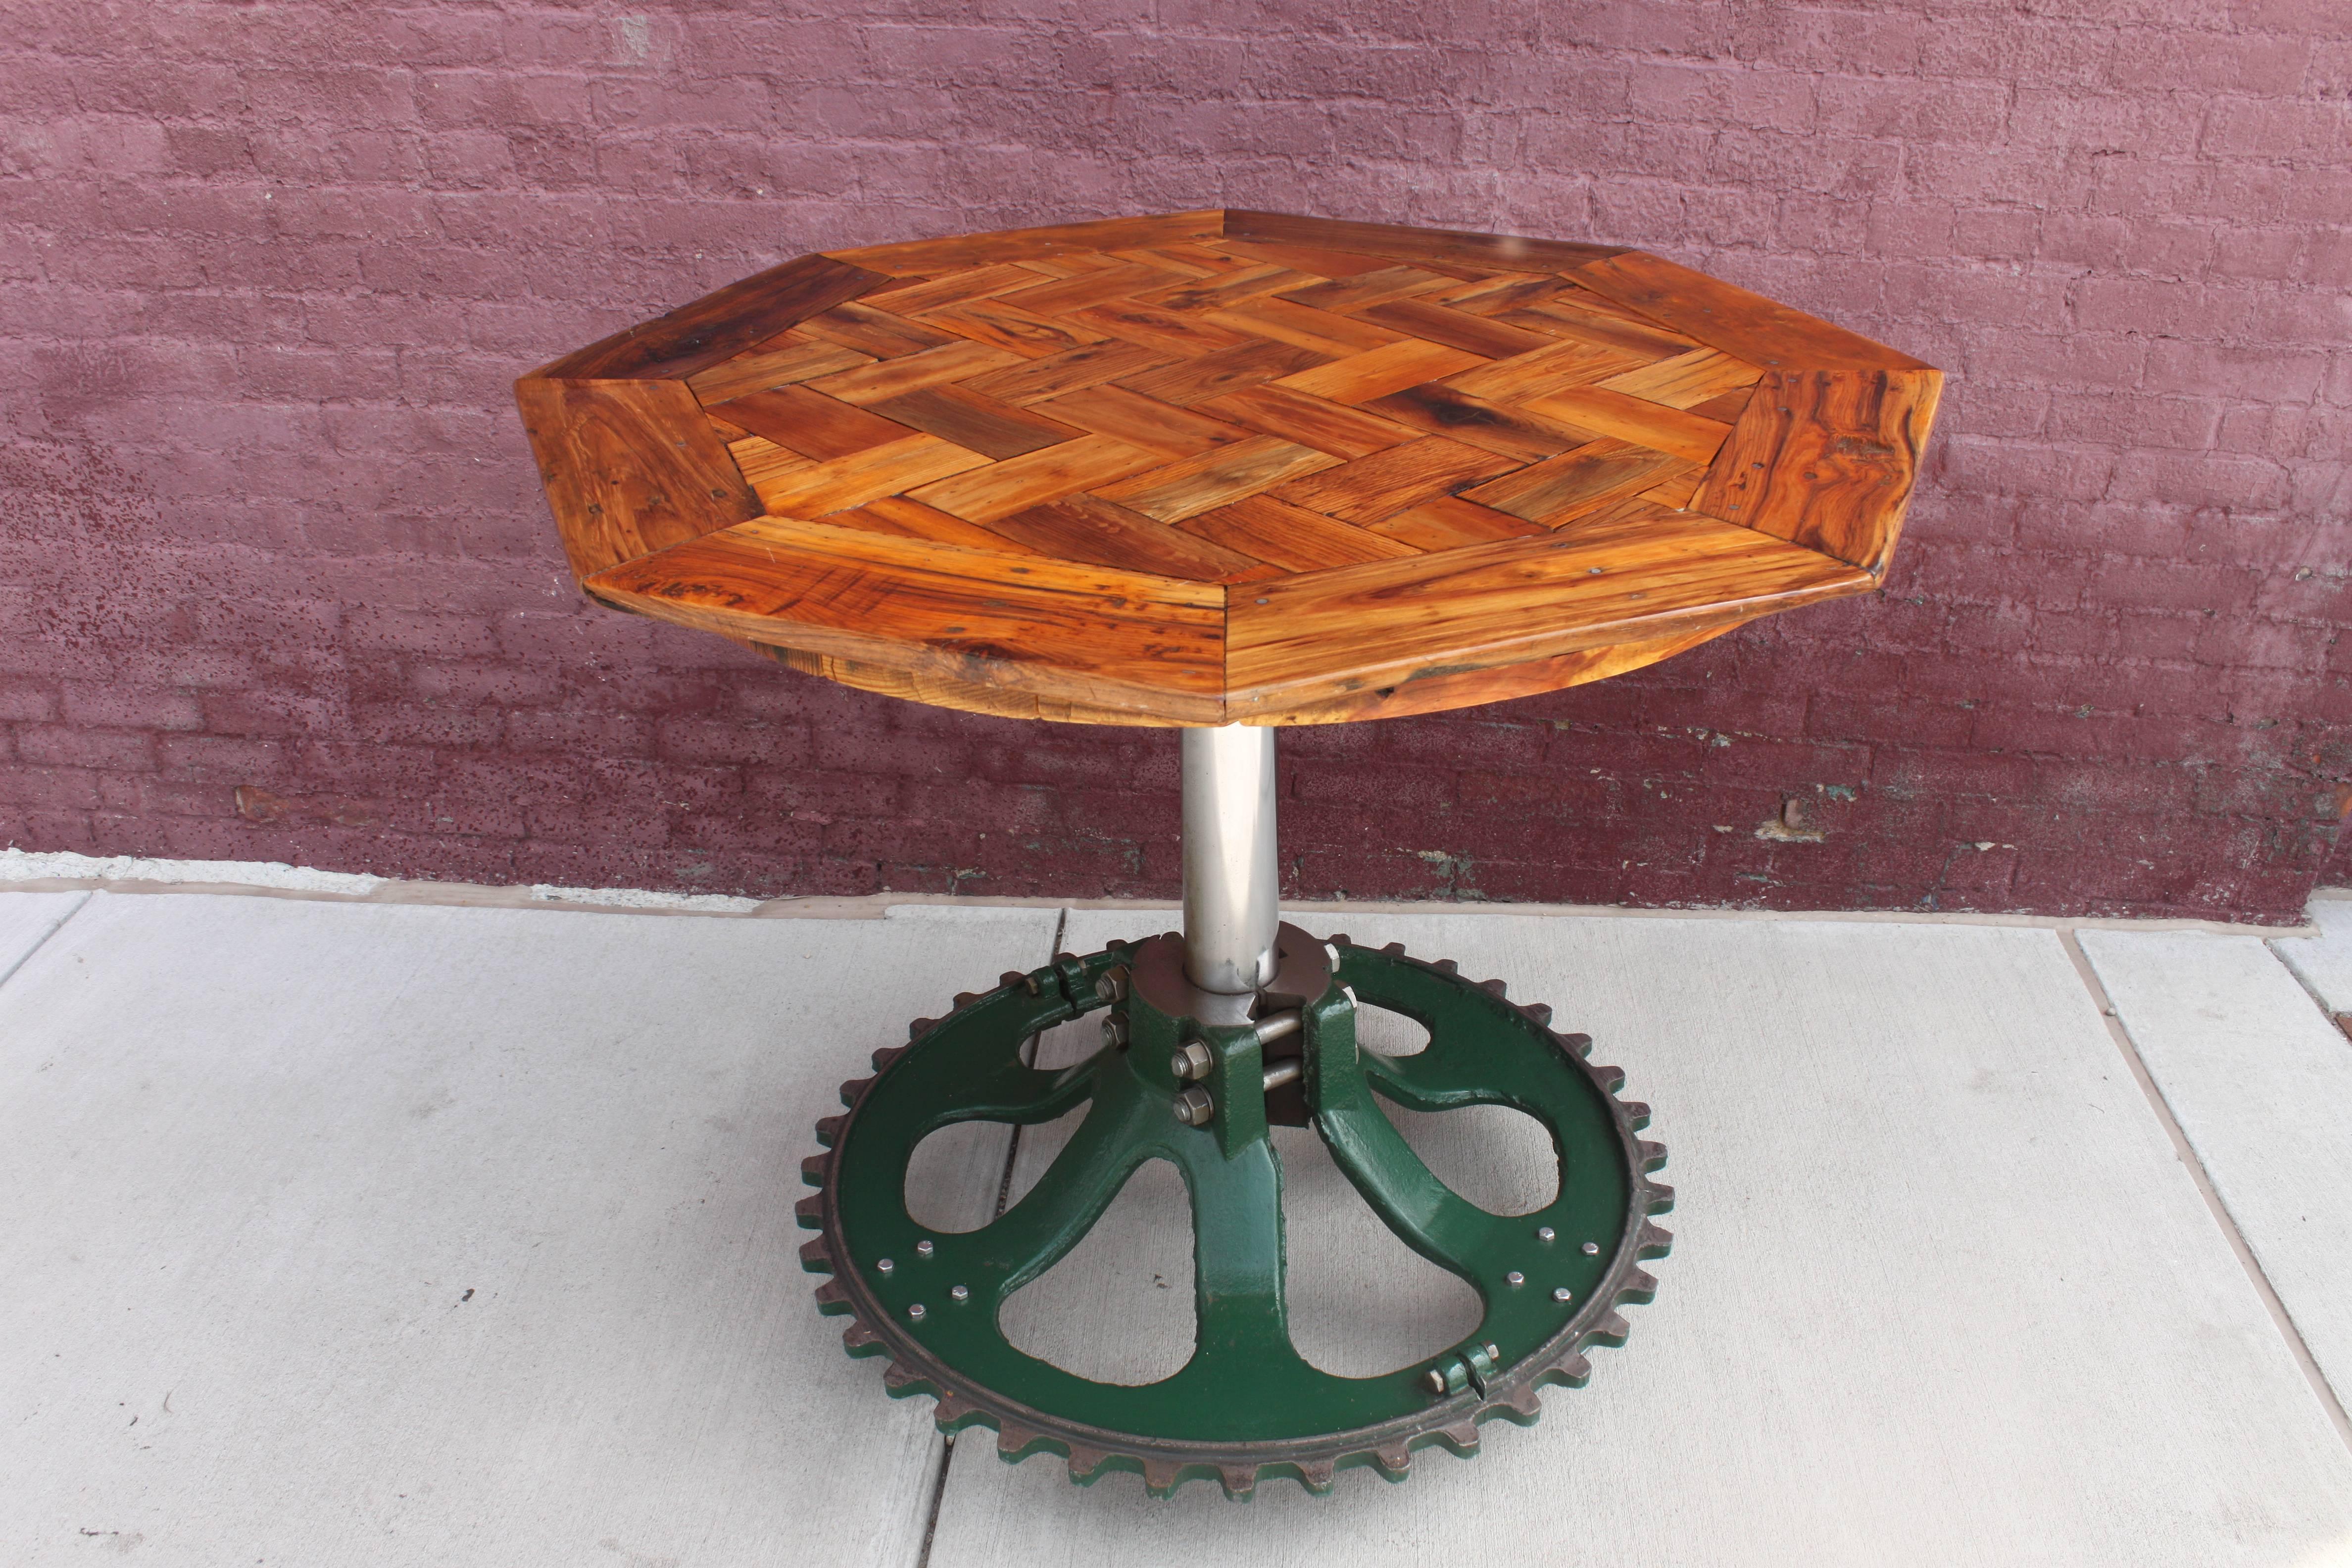 This table continues our tradition of transforming interesting industrial artifacts into distinctive, yet fully functional pieces. The base of this table is actually a massive, cast-steel, 34